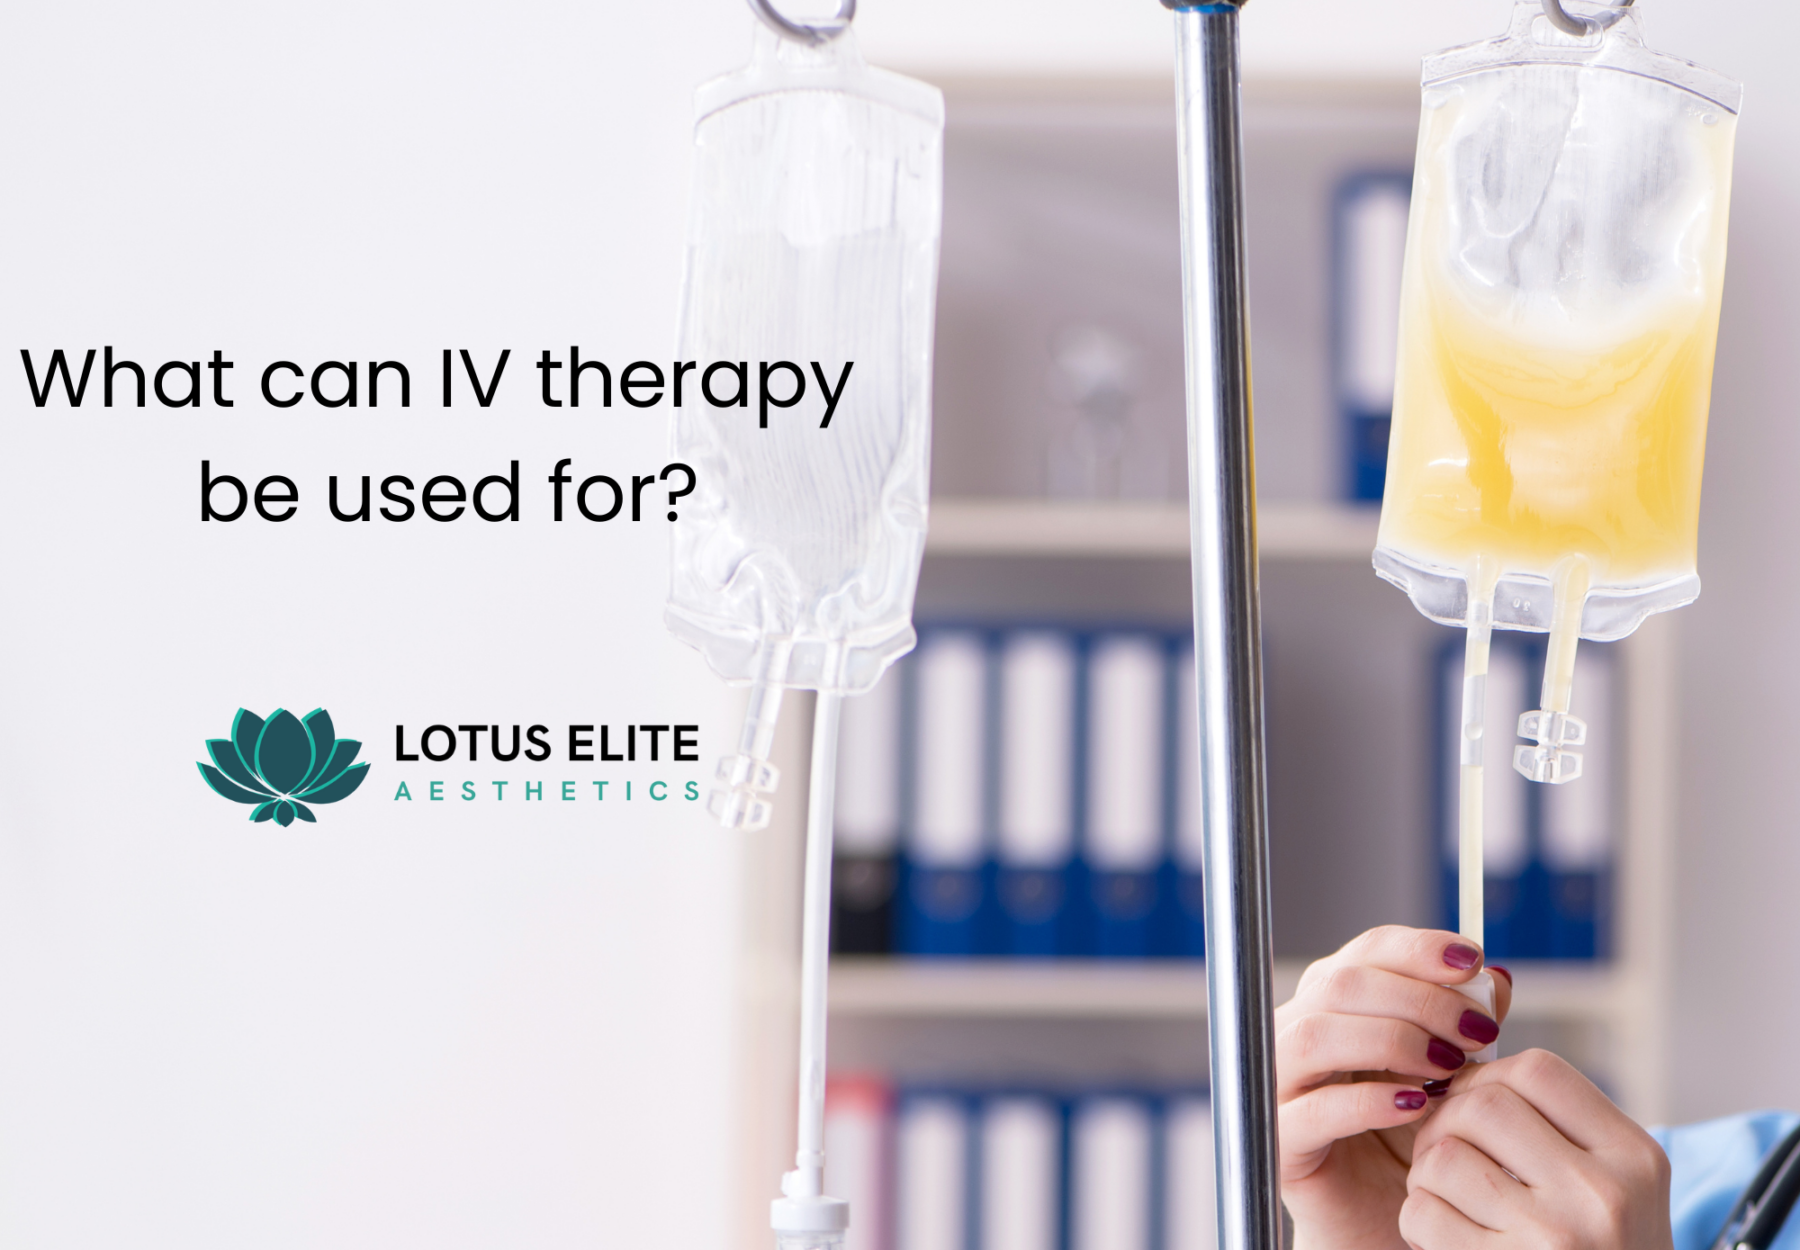 What can IV therapy be used for?